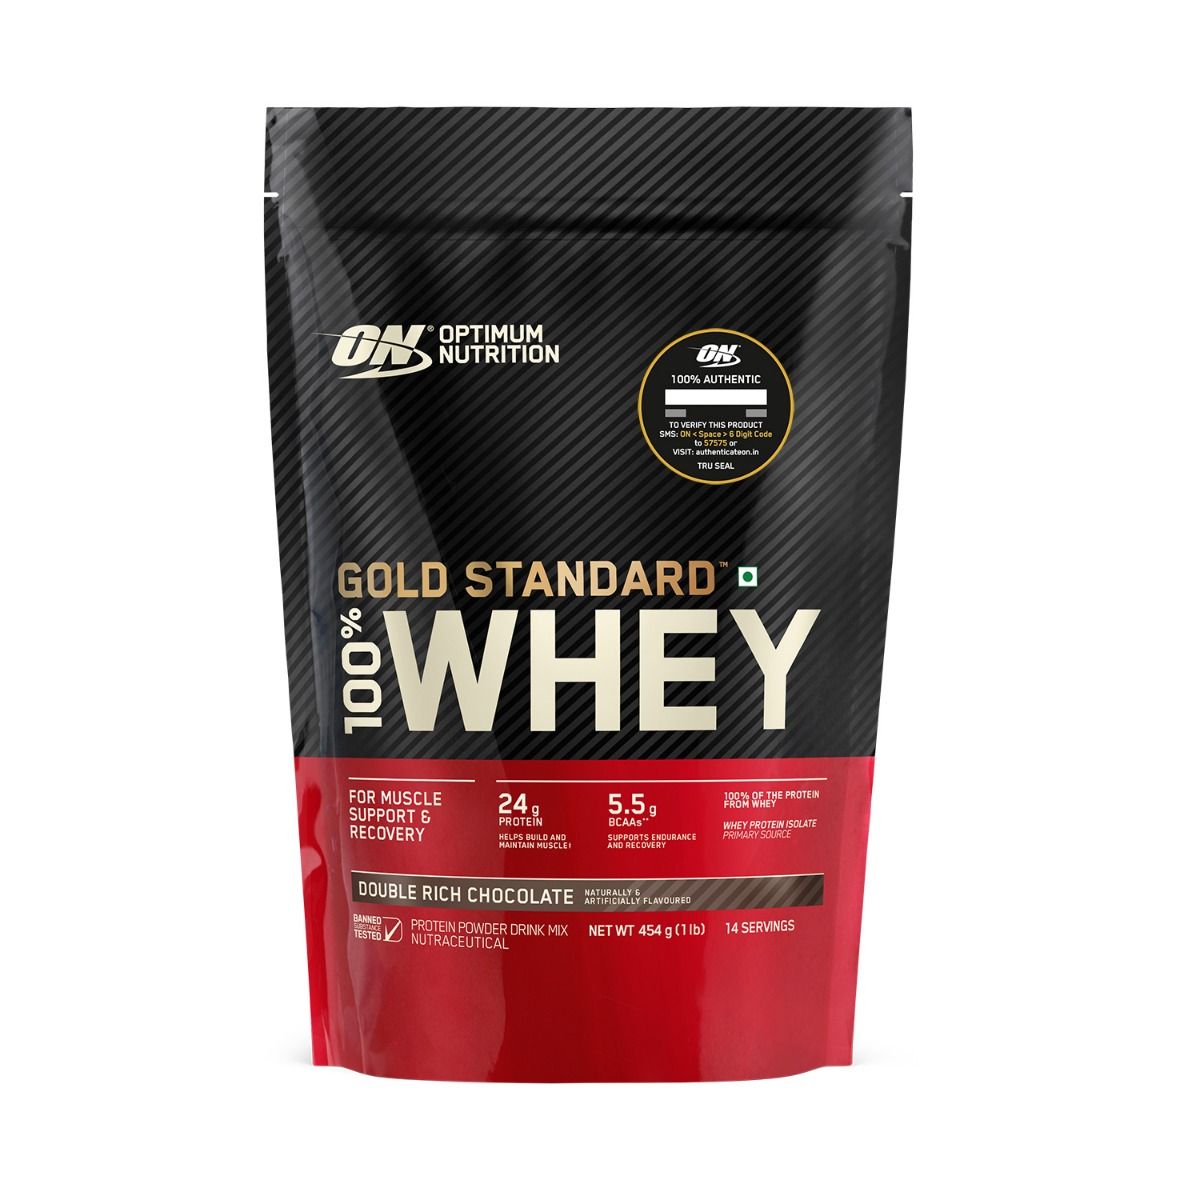 Optimum Nutrition (ON) Gold Standard 100% Whey Protein Double Rich Chocolate Flavour Powder, 1 lb, Pack of 1 